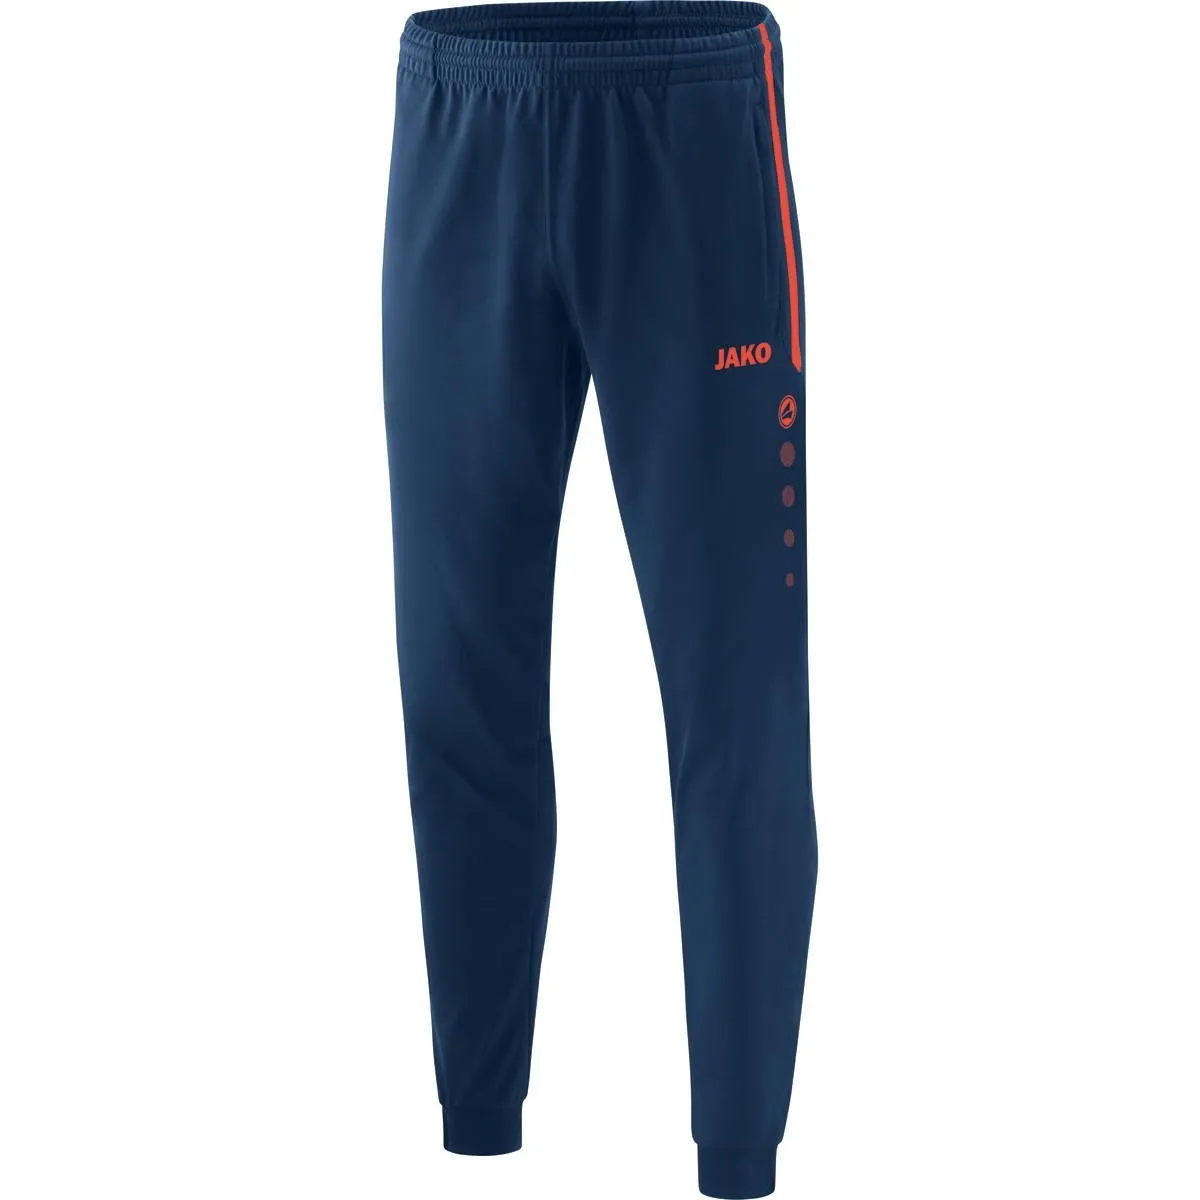 Polyesterhose Competition 2.0 navy/flame